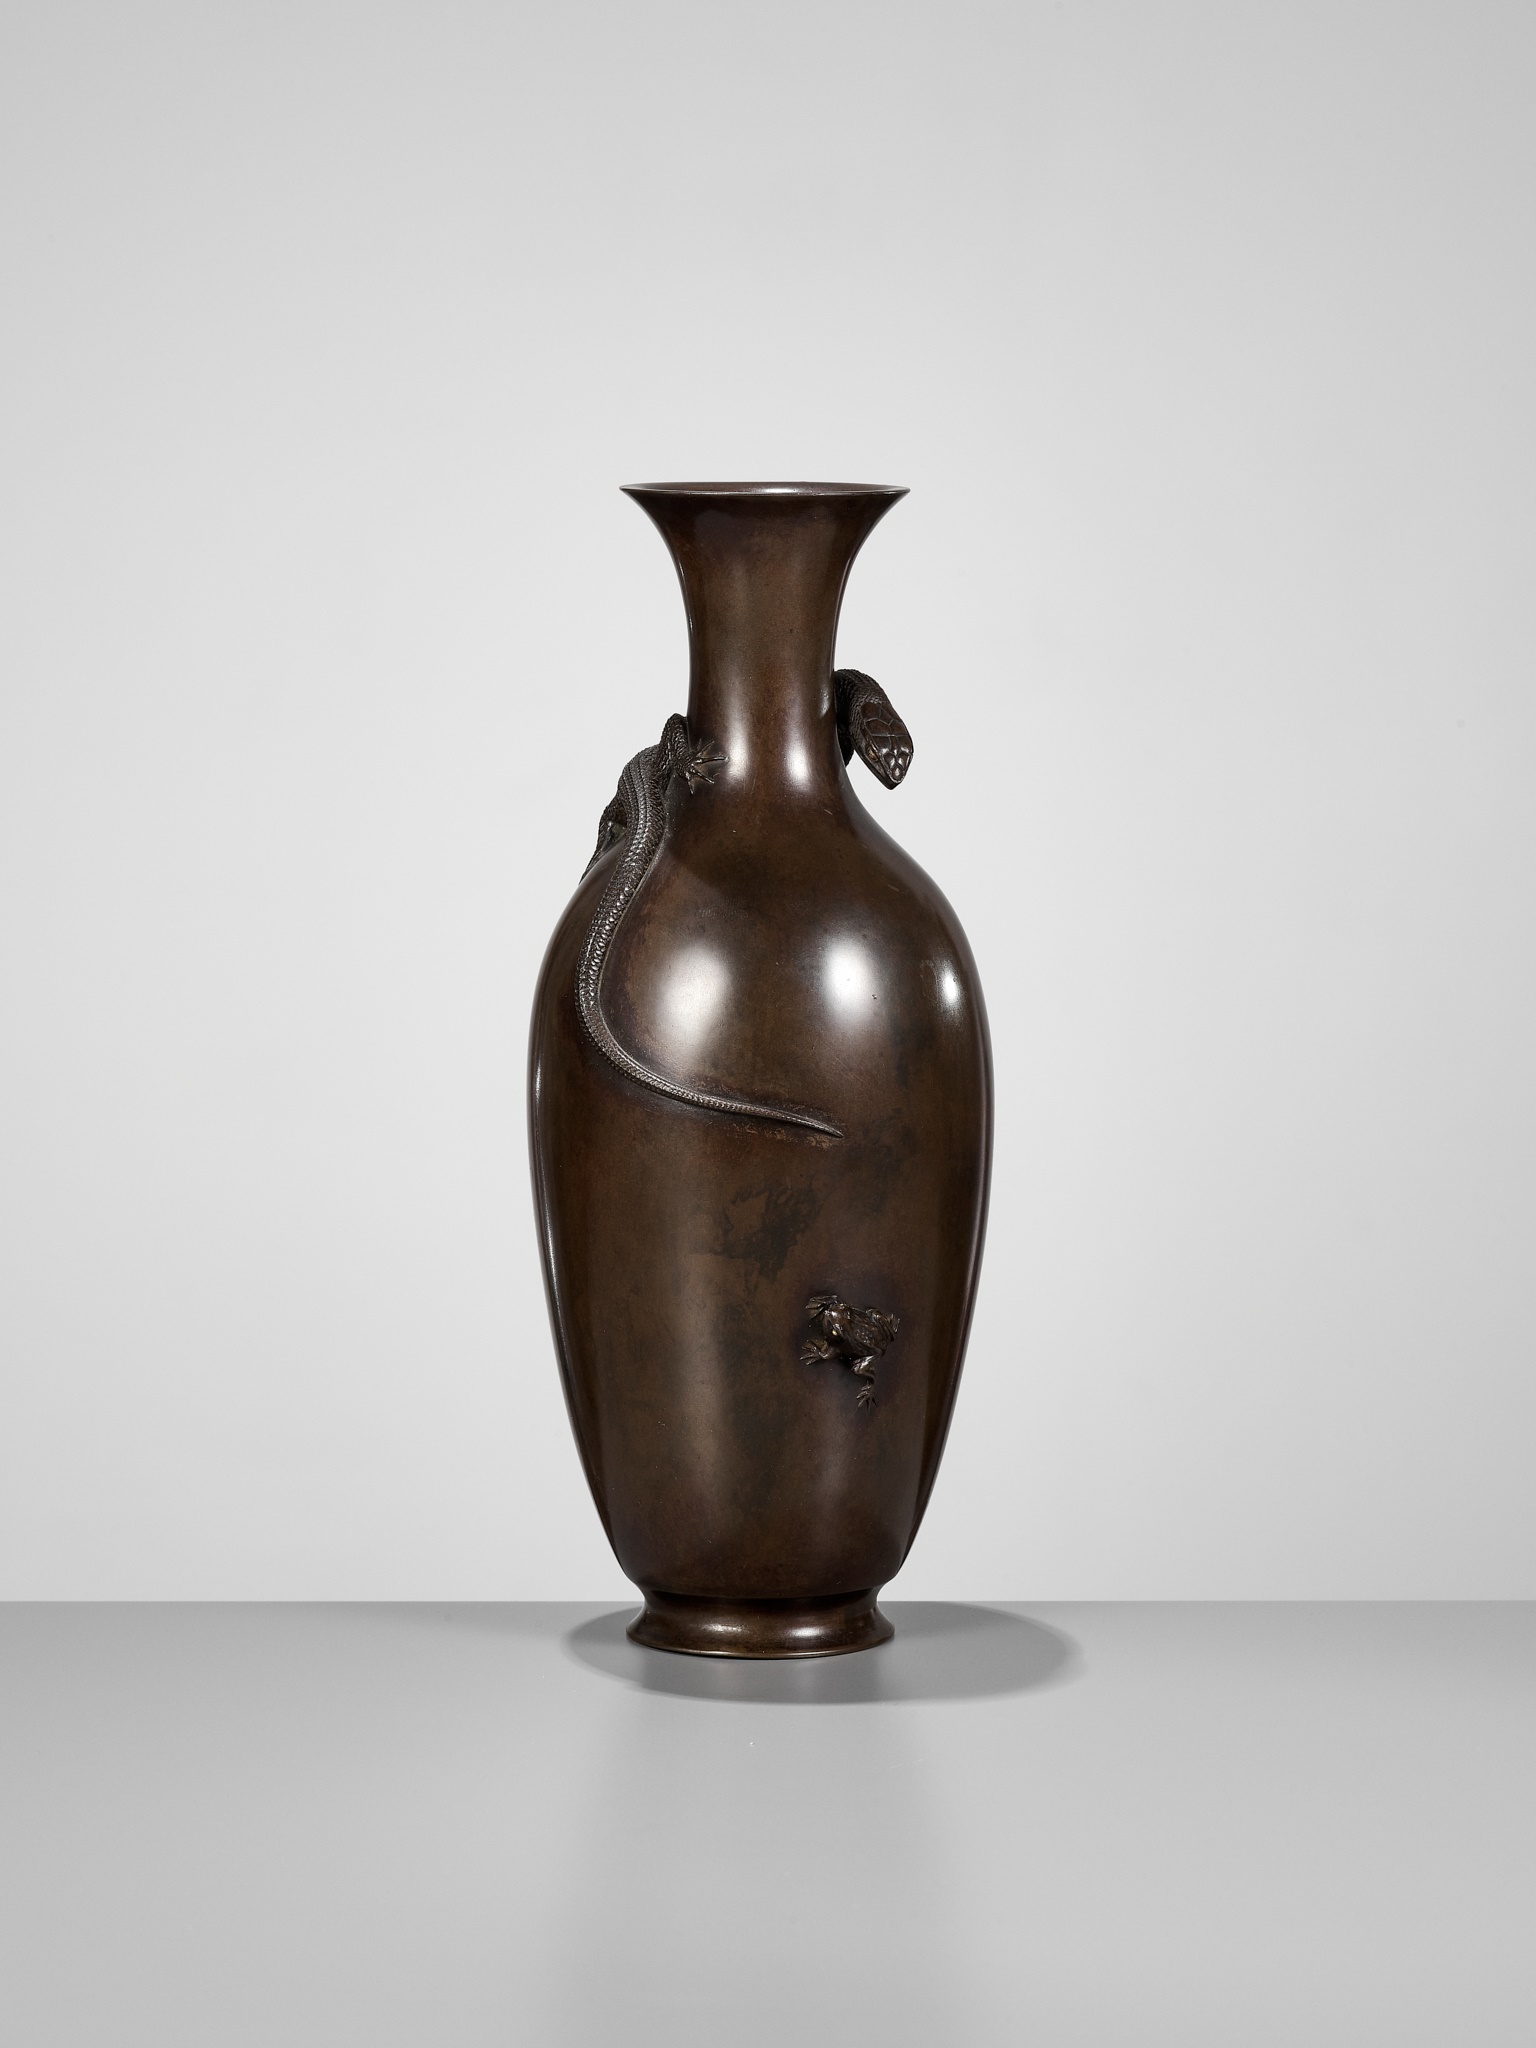 AKICHIKA: A FINE BRONZE VASE WITH LIZARD PREYING ON A FROG - Image 10 of 13